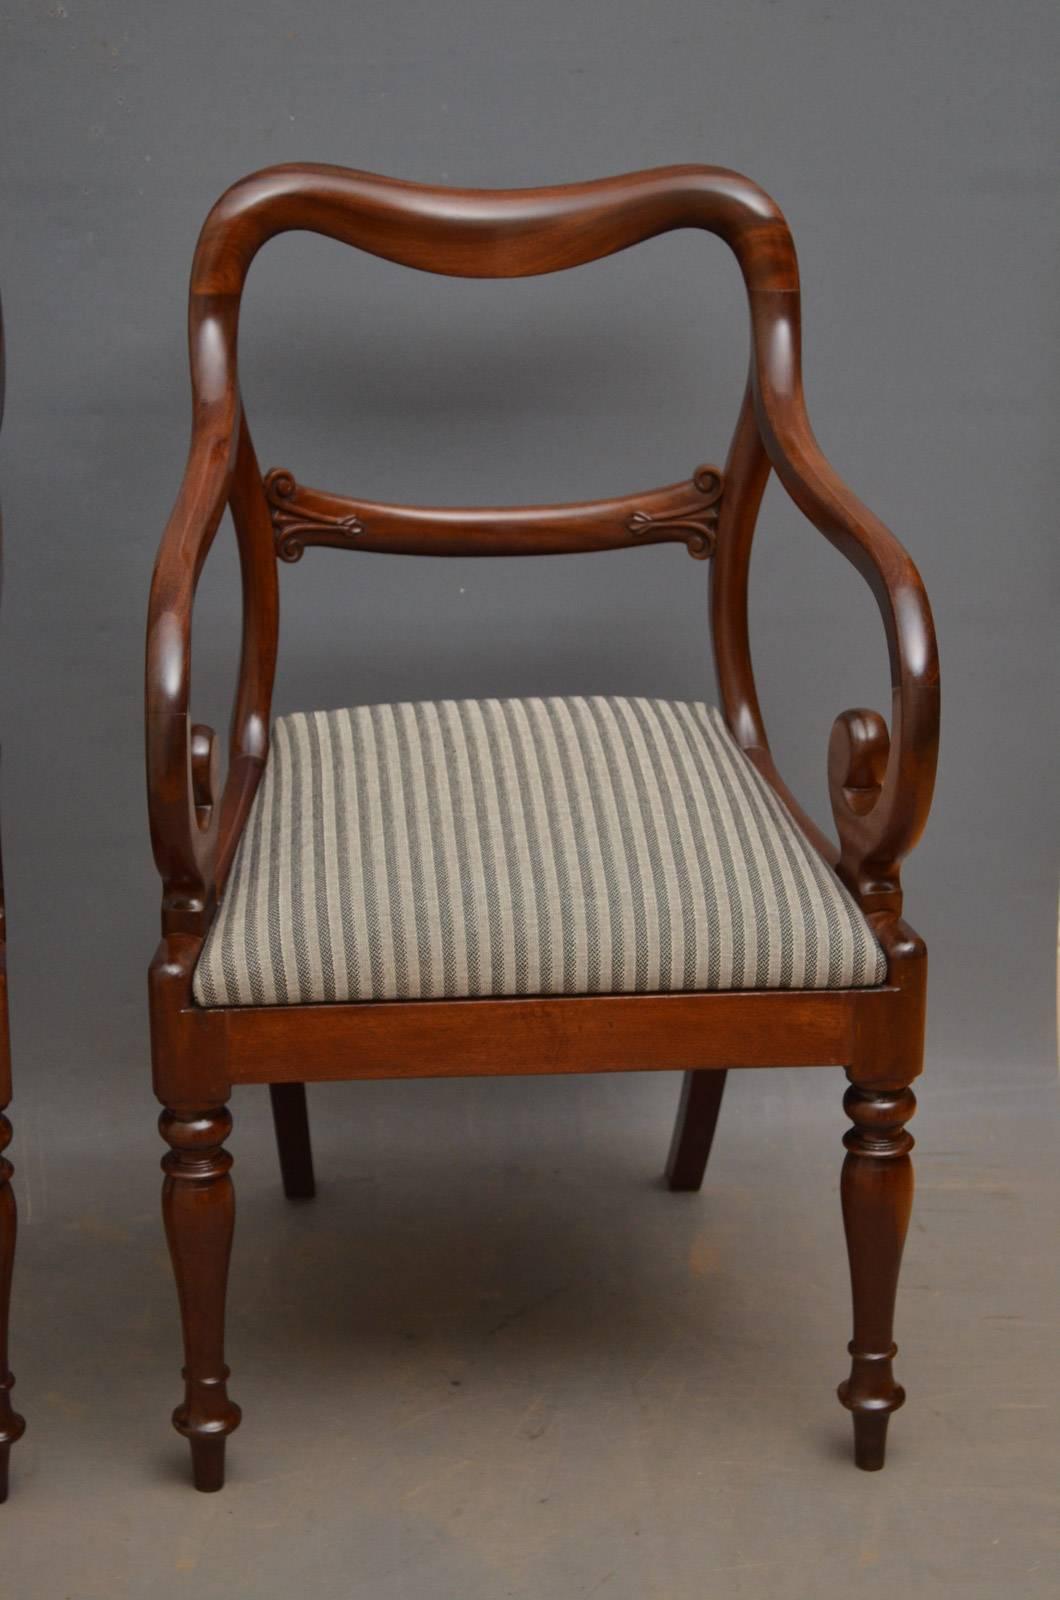 Sn4366 pair of superb quality early Victorian carver chairs in mahogany, having balloon back top rail with carved mid rail, newly upholstered drop in seat and open scroll arms, all standing on turned legs. These antique elbow chars retain original